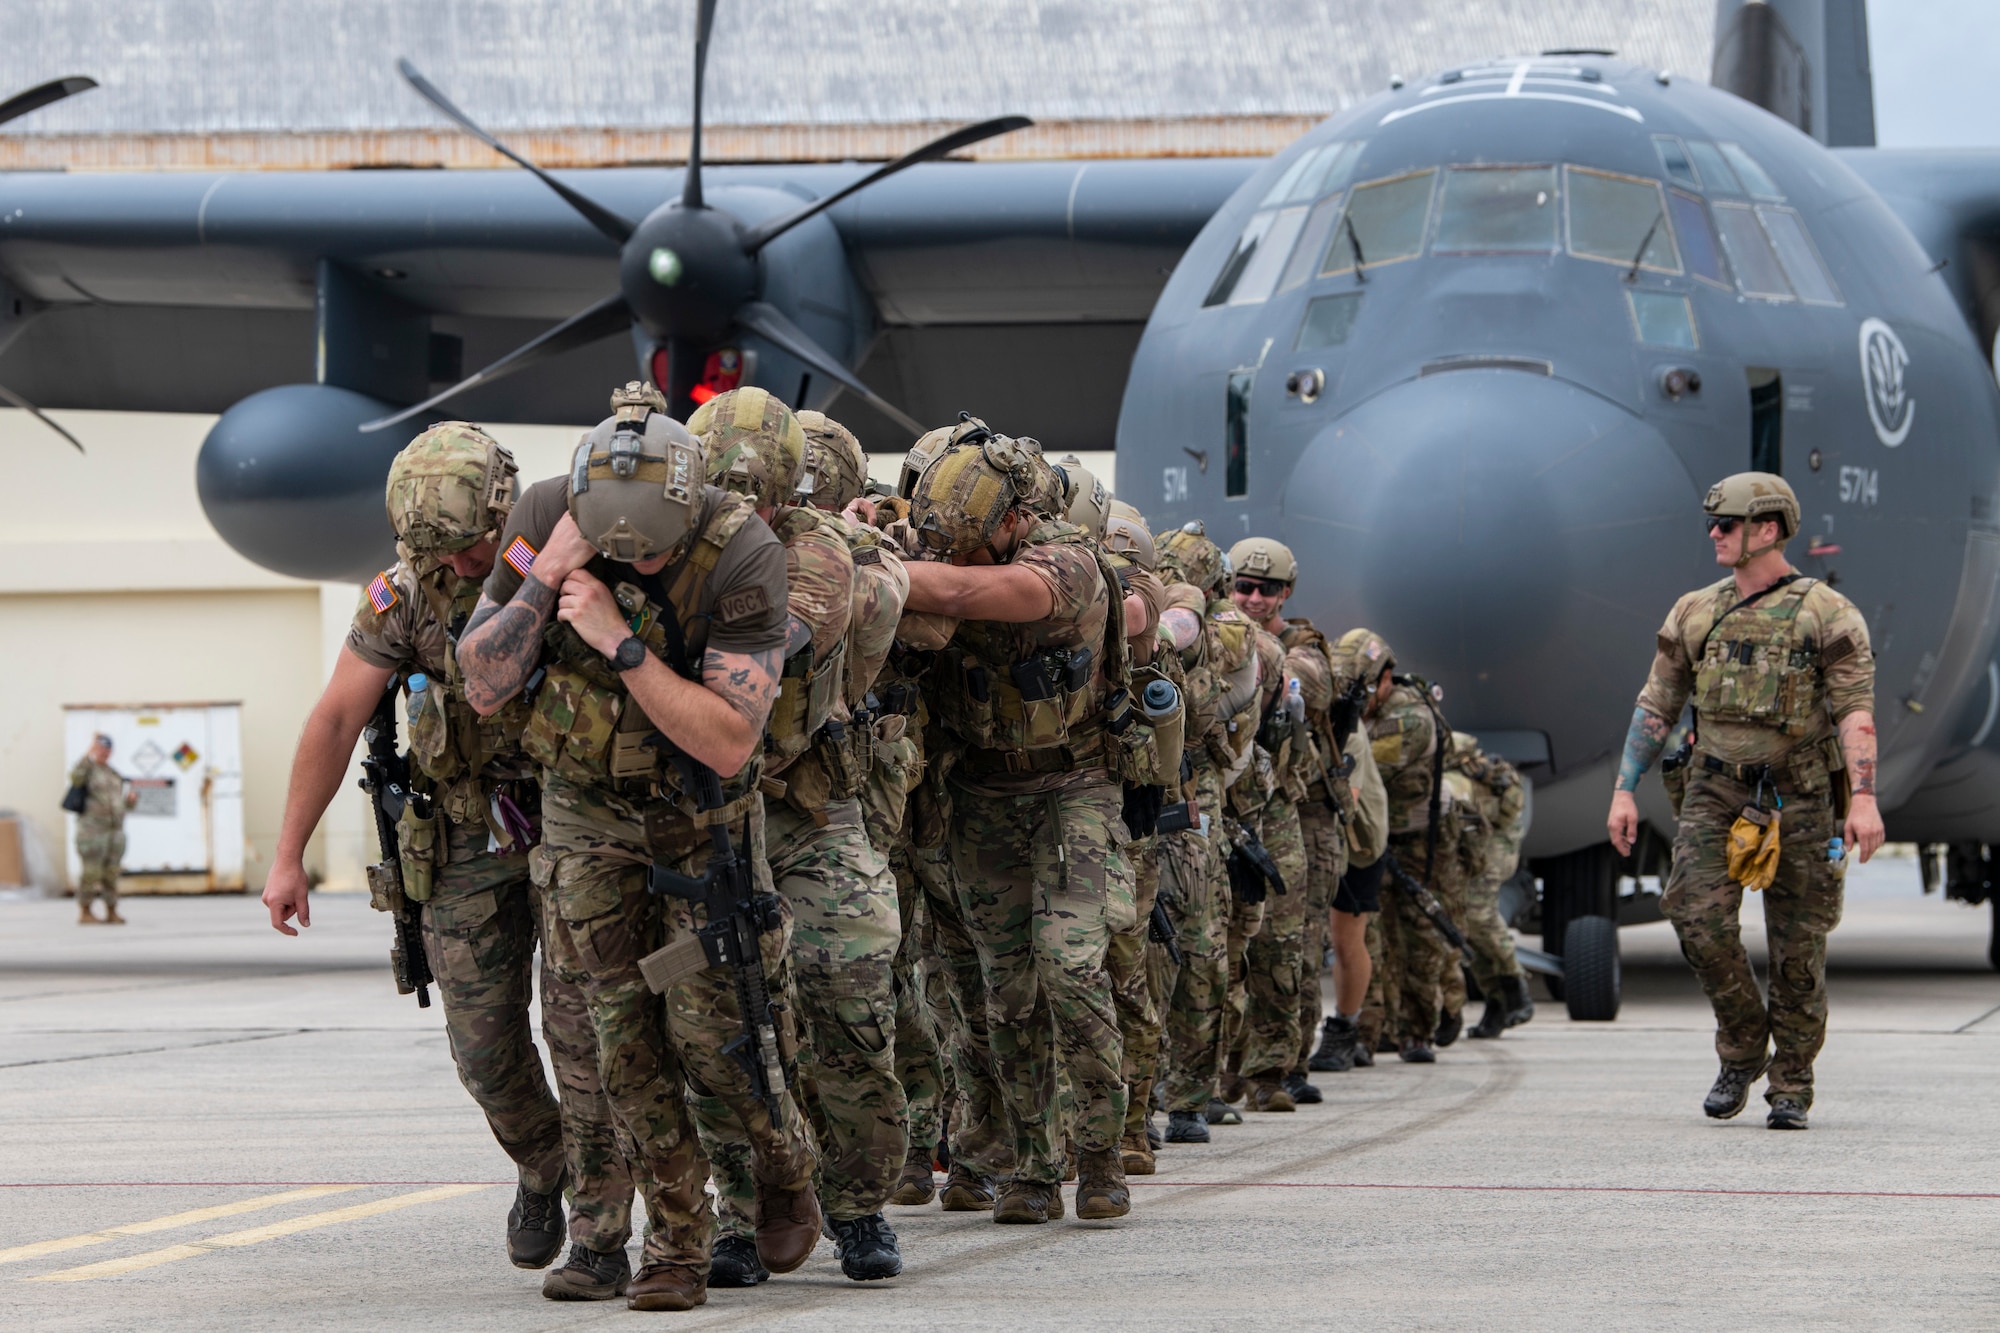 U.S. Air Force special tactics Airmen with the 320th Special Tactics Squadron pull an MC-130J Commando II 150 meters across the parking apron during Monster Mash, an operational readiness and resilience training, at Kadena Air Base, Japan, May 5, 2023. These training events, consisting of various physically and mentally demanding tasks, are routinely conducted among special tactics units to ensure operational readiness and enhance resiliency among the operators. (U.S. Air Force photo by Staff Sgt. Jessi Roth)